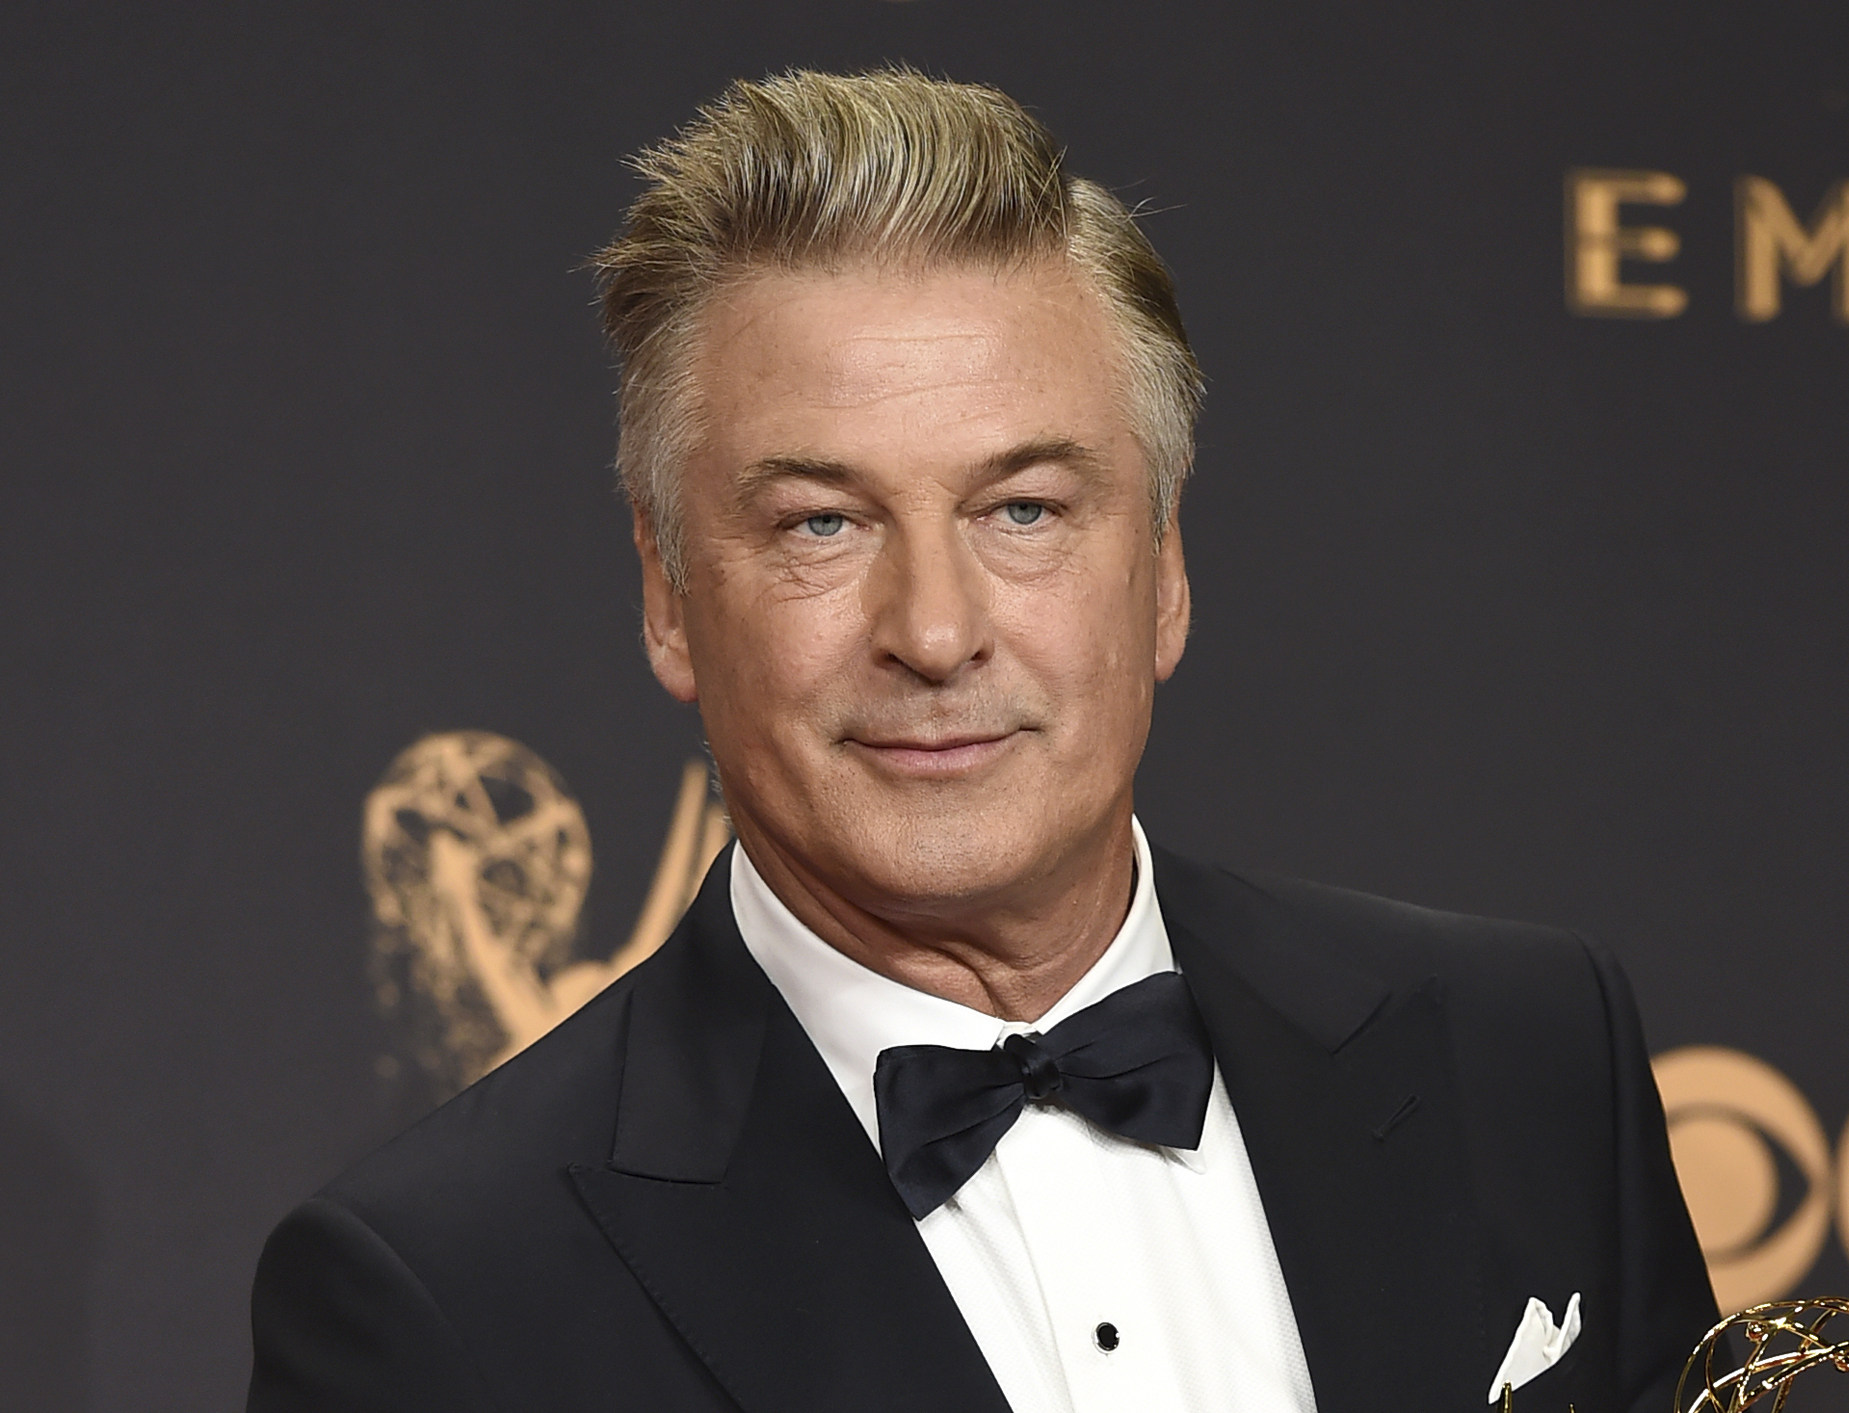 Alec Baldwin poses for photos at the 69th Primetime Emmy Awards in Los Angeles in September 2017. Photo: AP